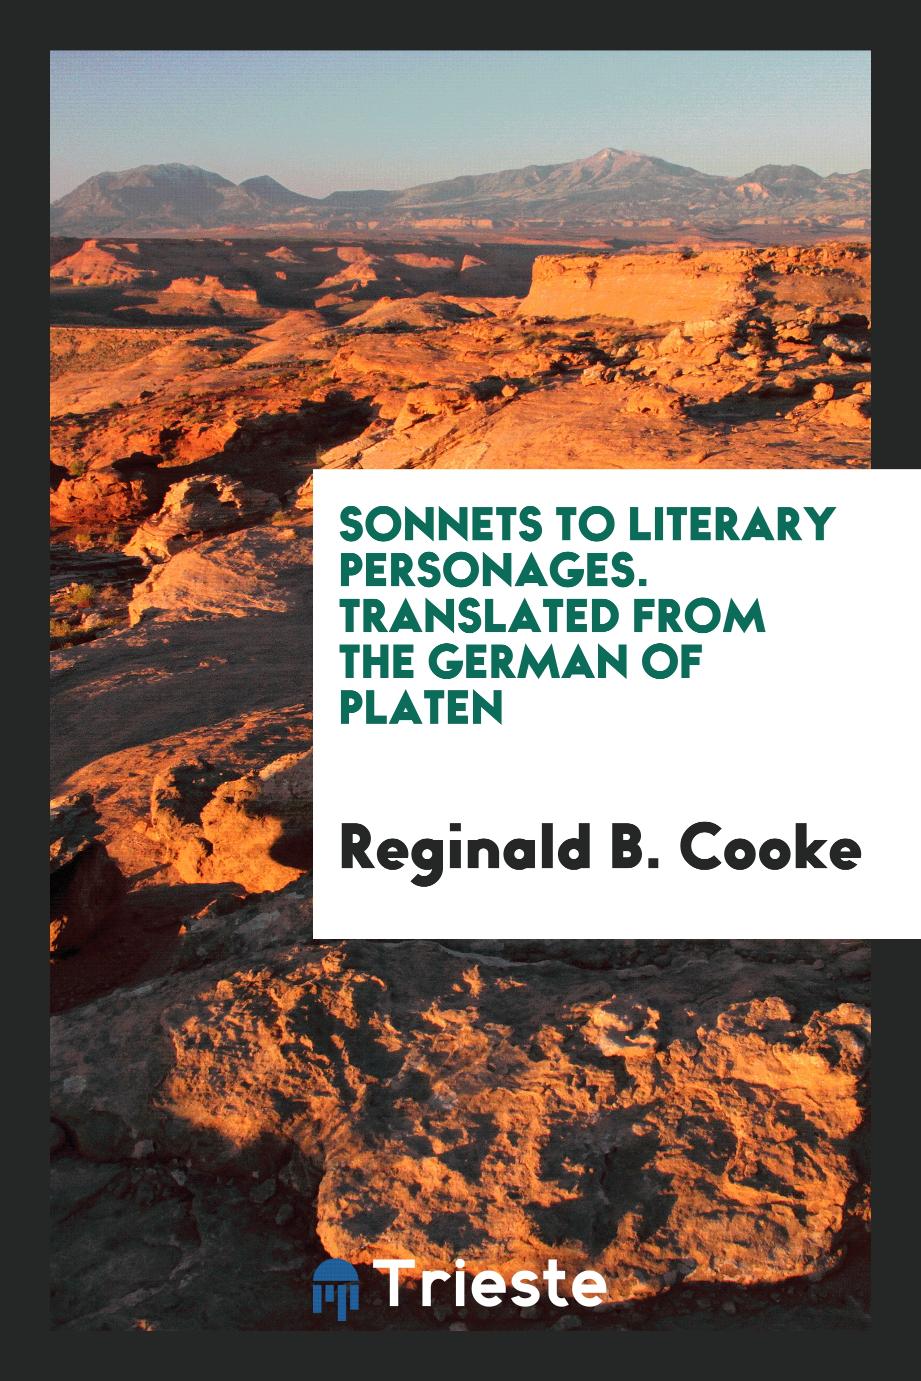 Sonnets to literary personages. Translated from the German of Platen